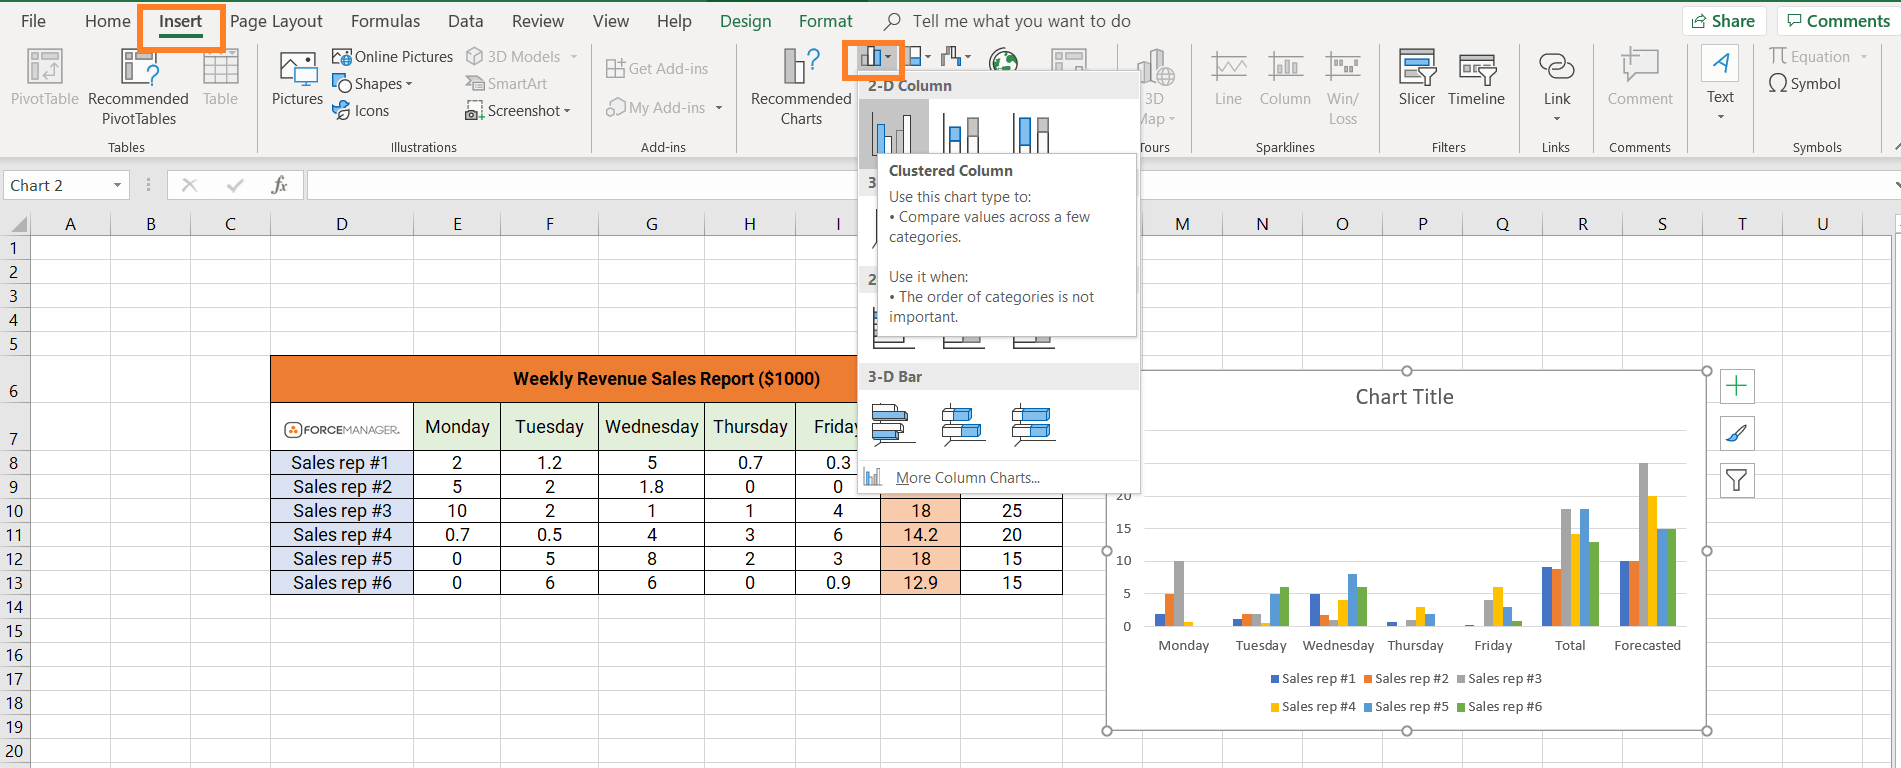 How to Make a Sales Report in Excel: The Pros and Cons